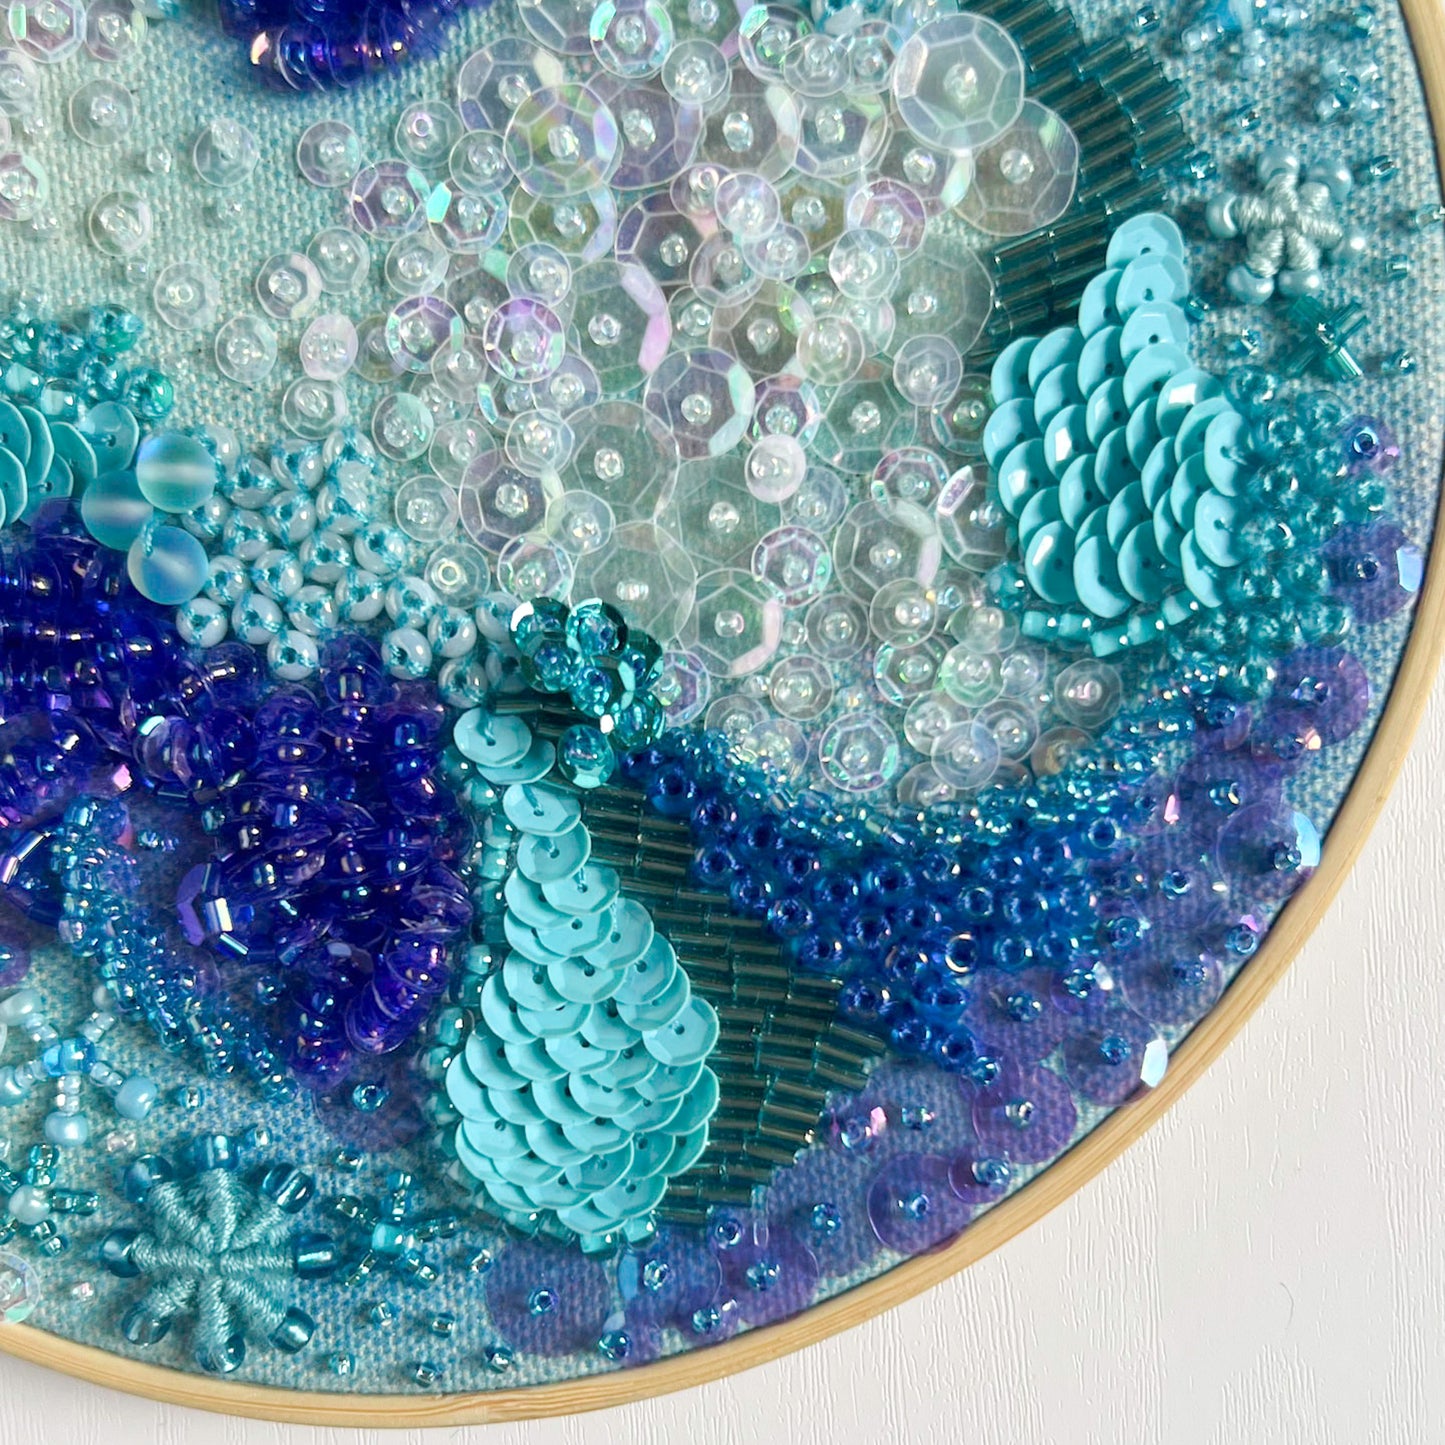 Shimmering Waters - Embroidery